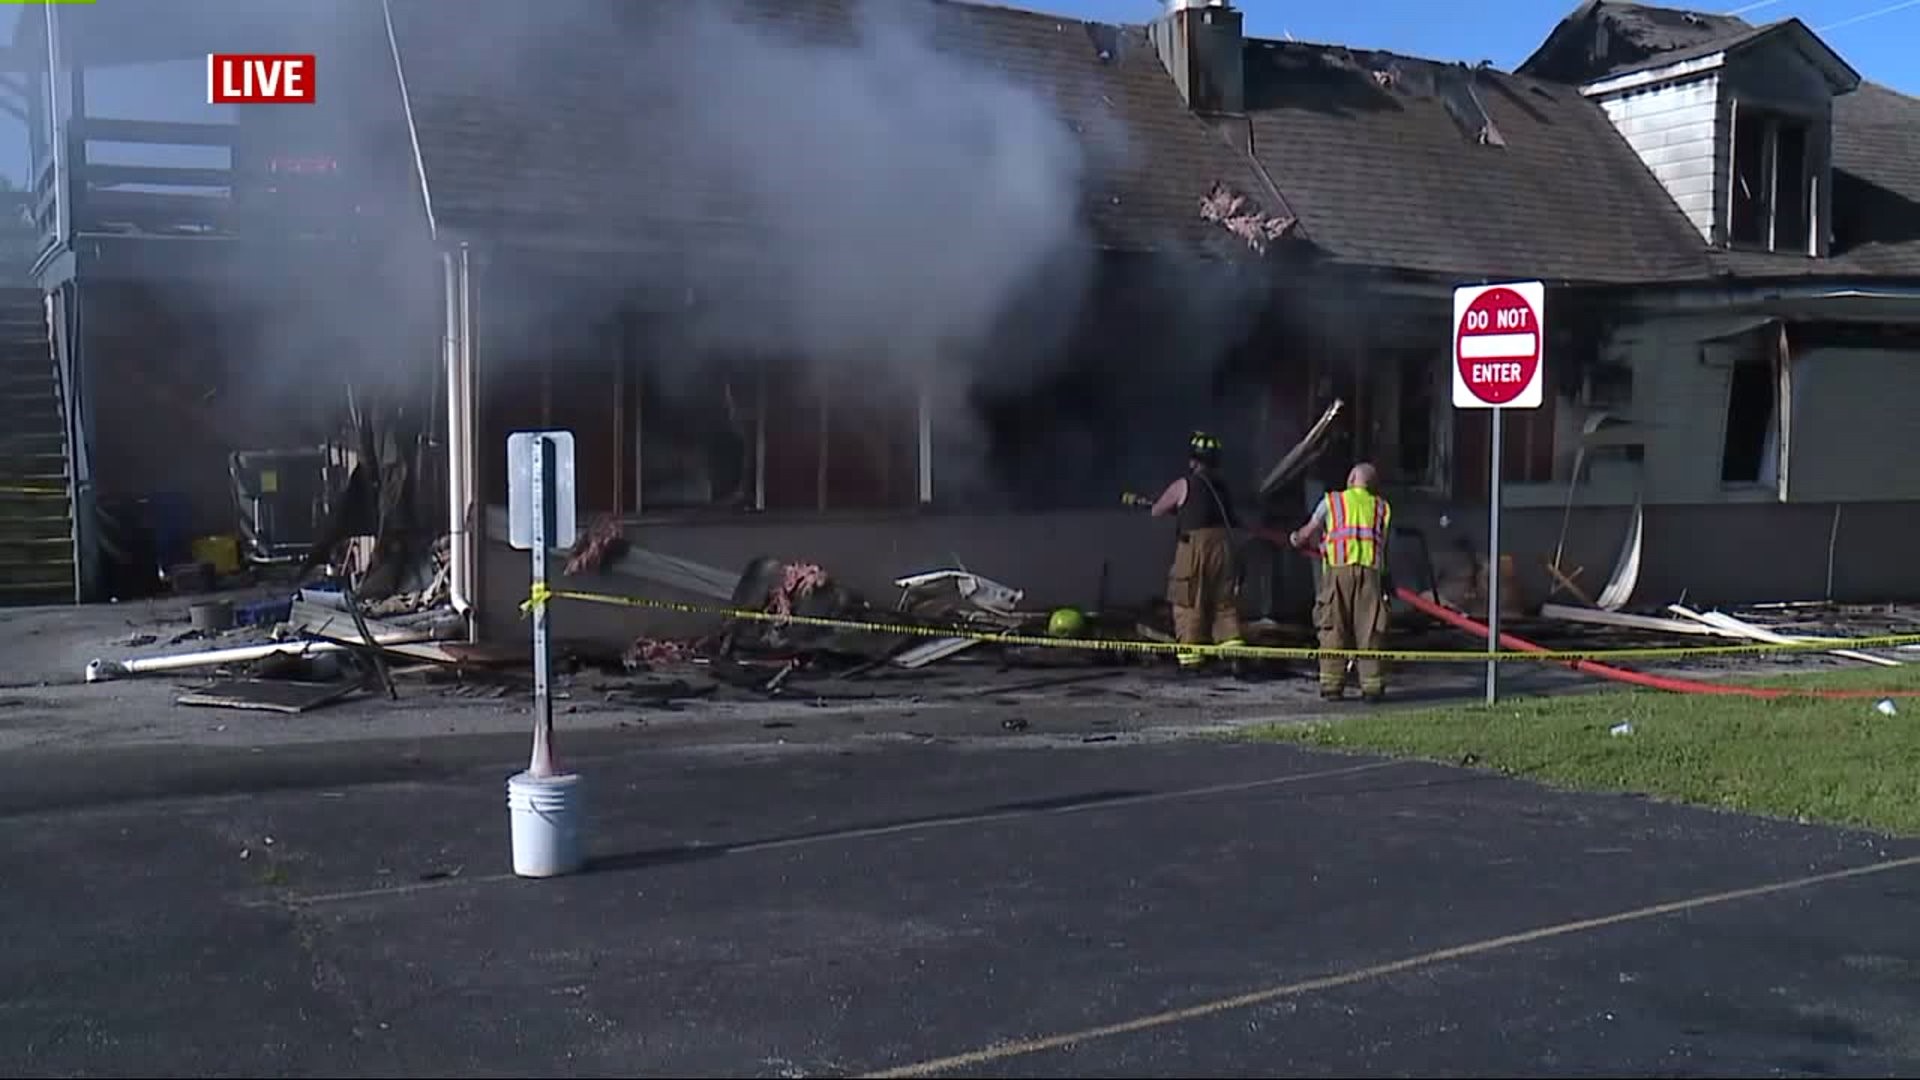 Eight people displaced after pizza shop, apartment building fire in Biglerville